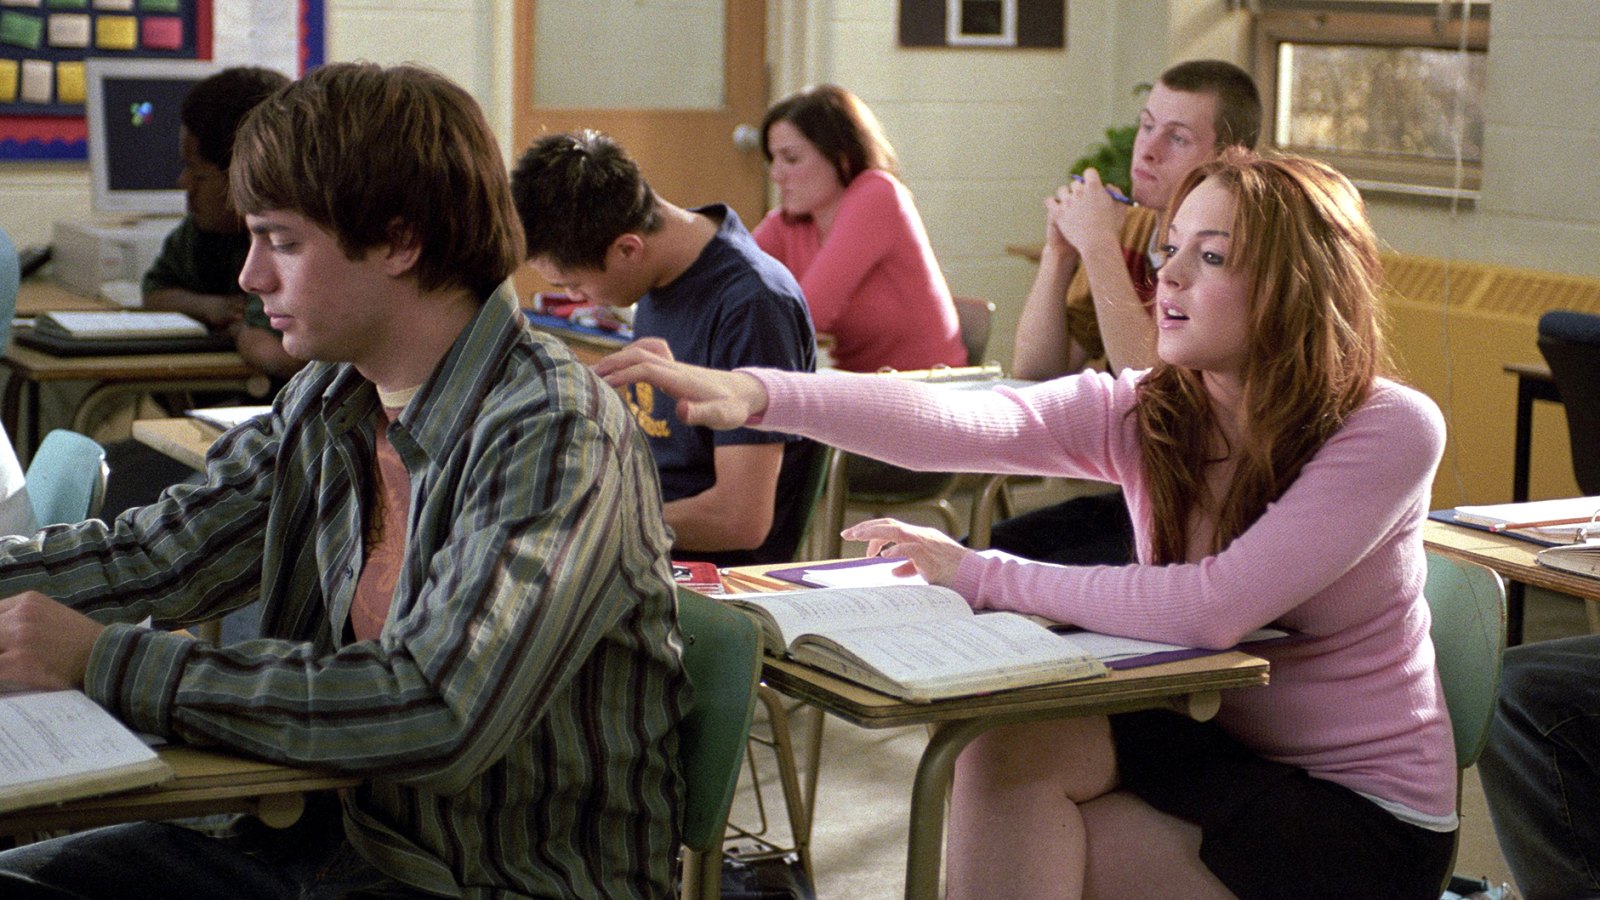 Lindsay Lohan and ‘Mean Girls’ Costars Celebrate October 3 With Hilarious Exchange